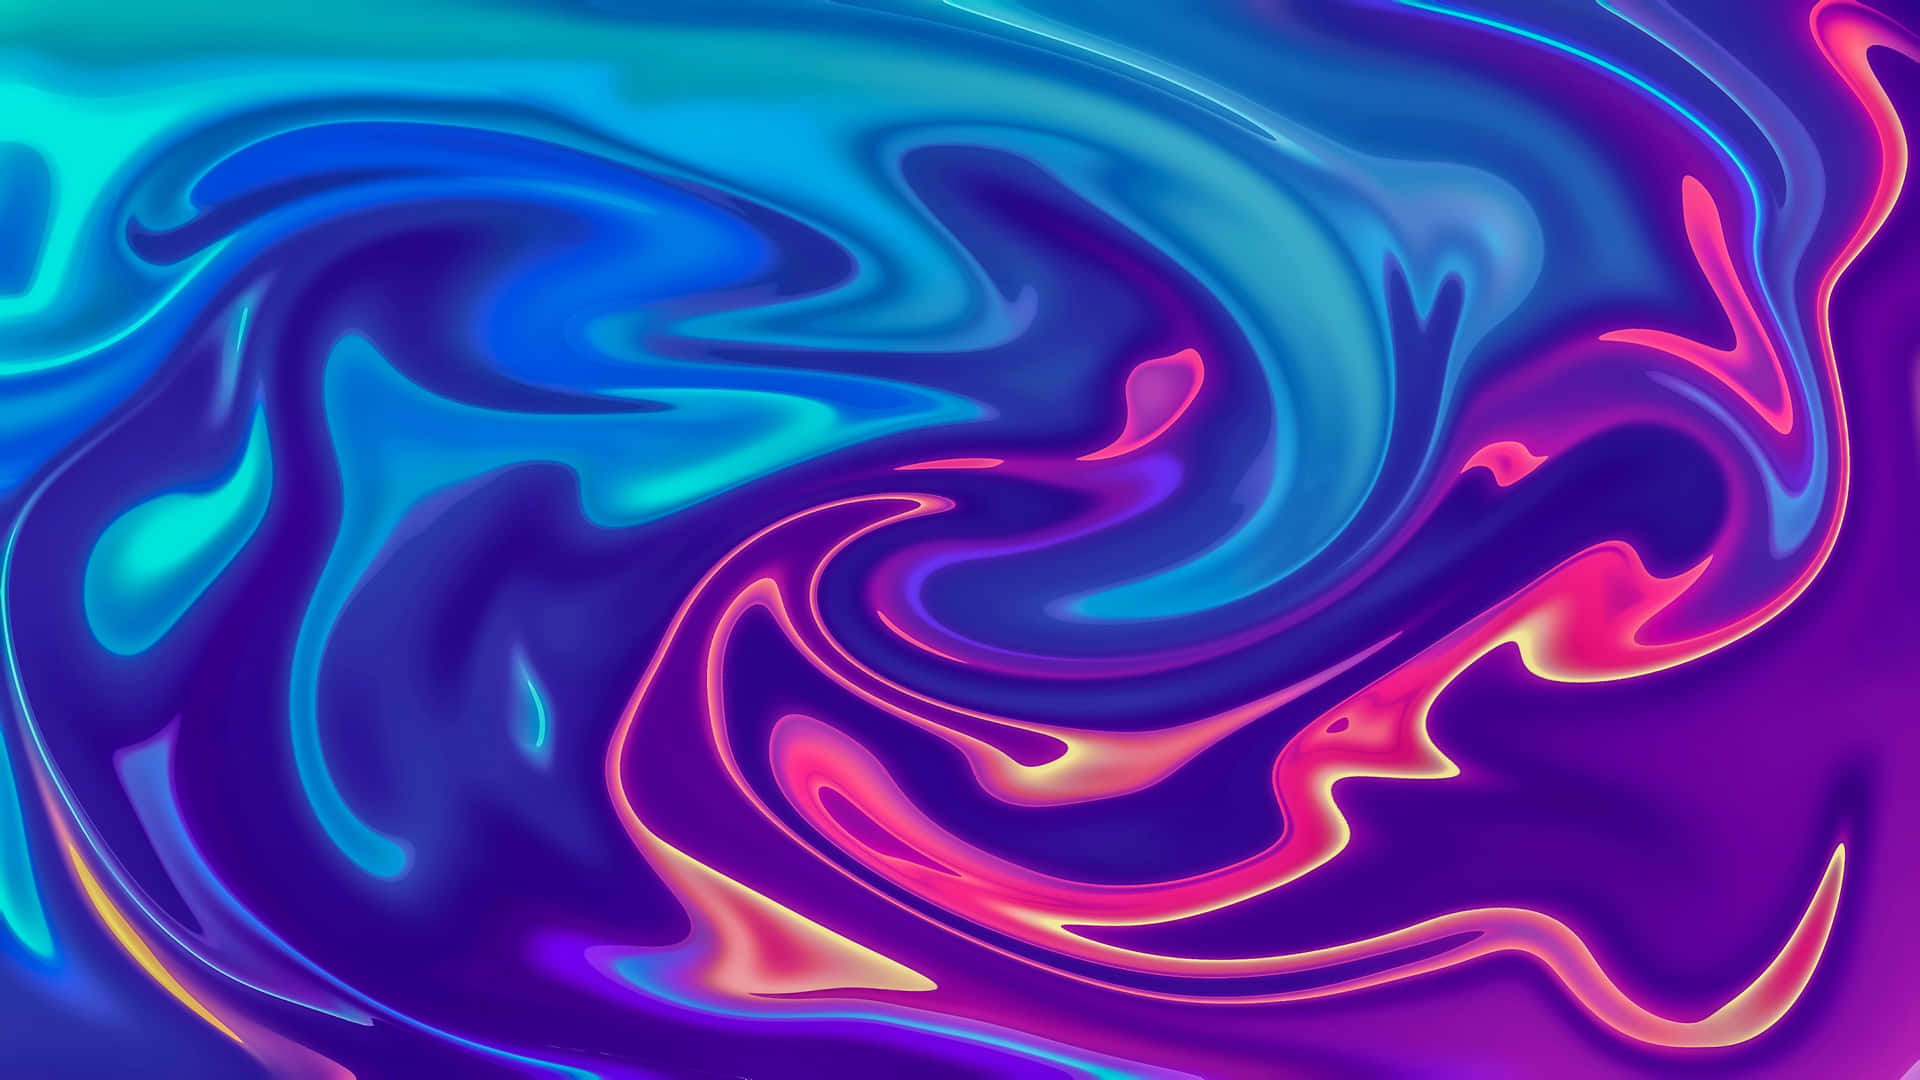 Colorful Abstract Art With Satin Texture Wallpaper